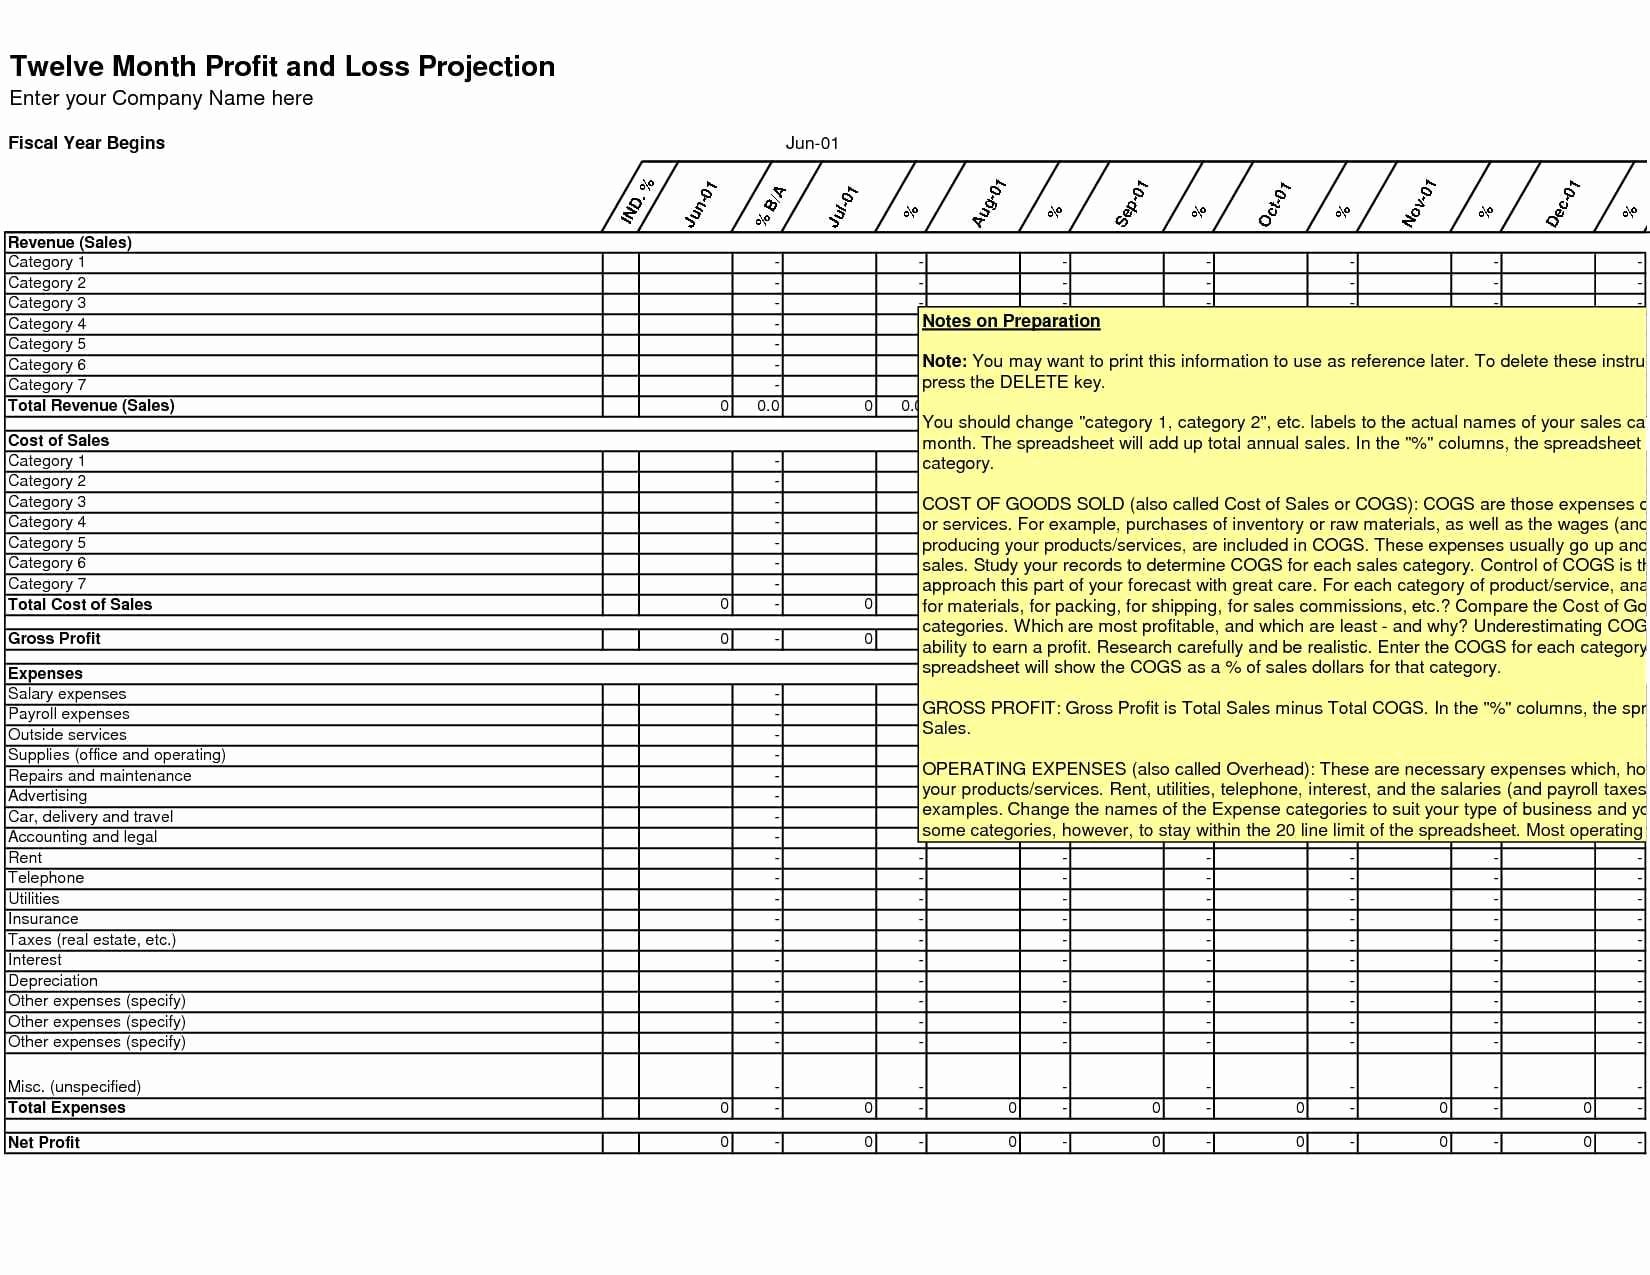 Small Business Tax Spreadsheet Excel Deductions Worksheet db excel com